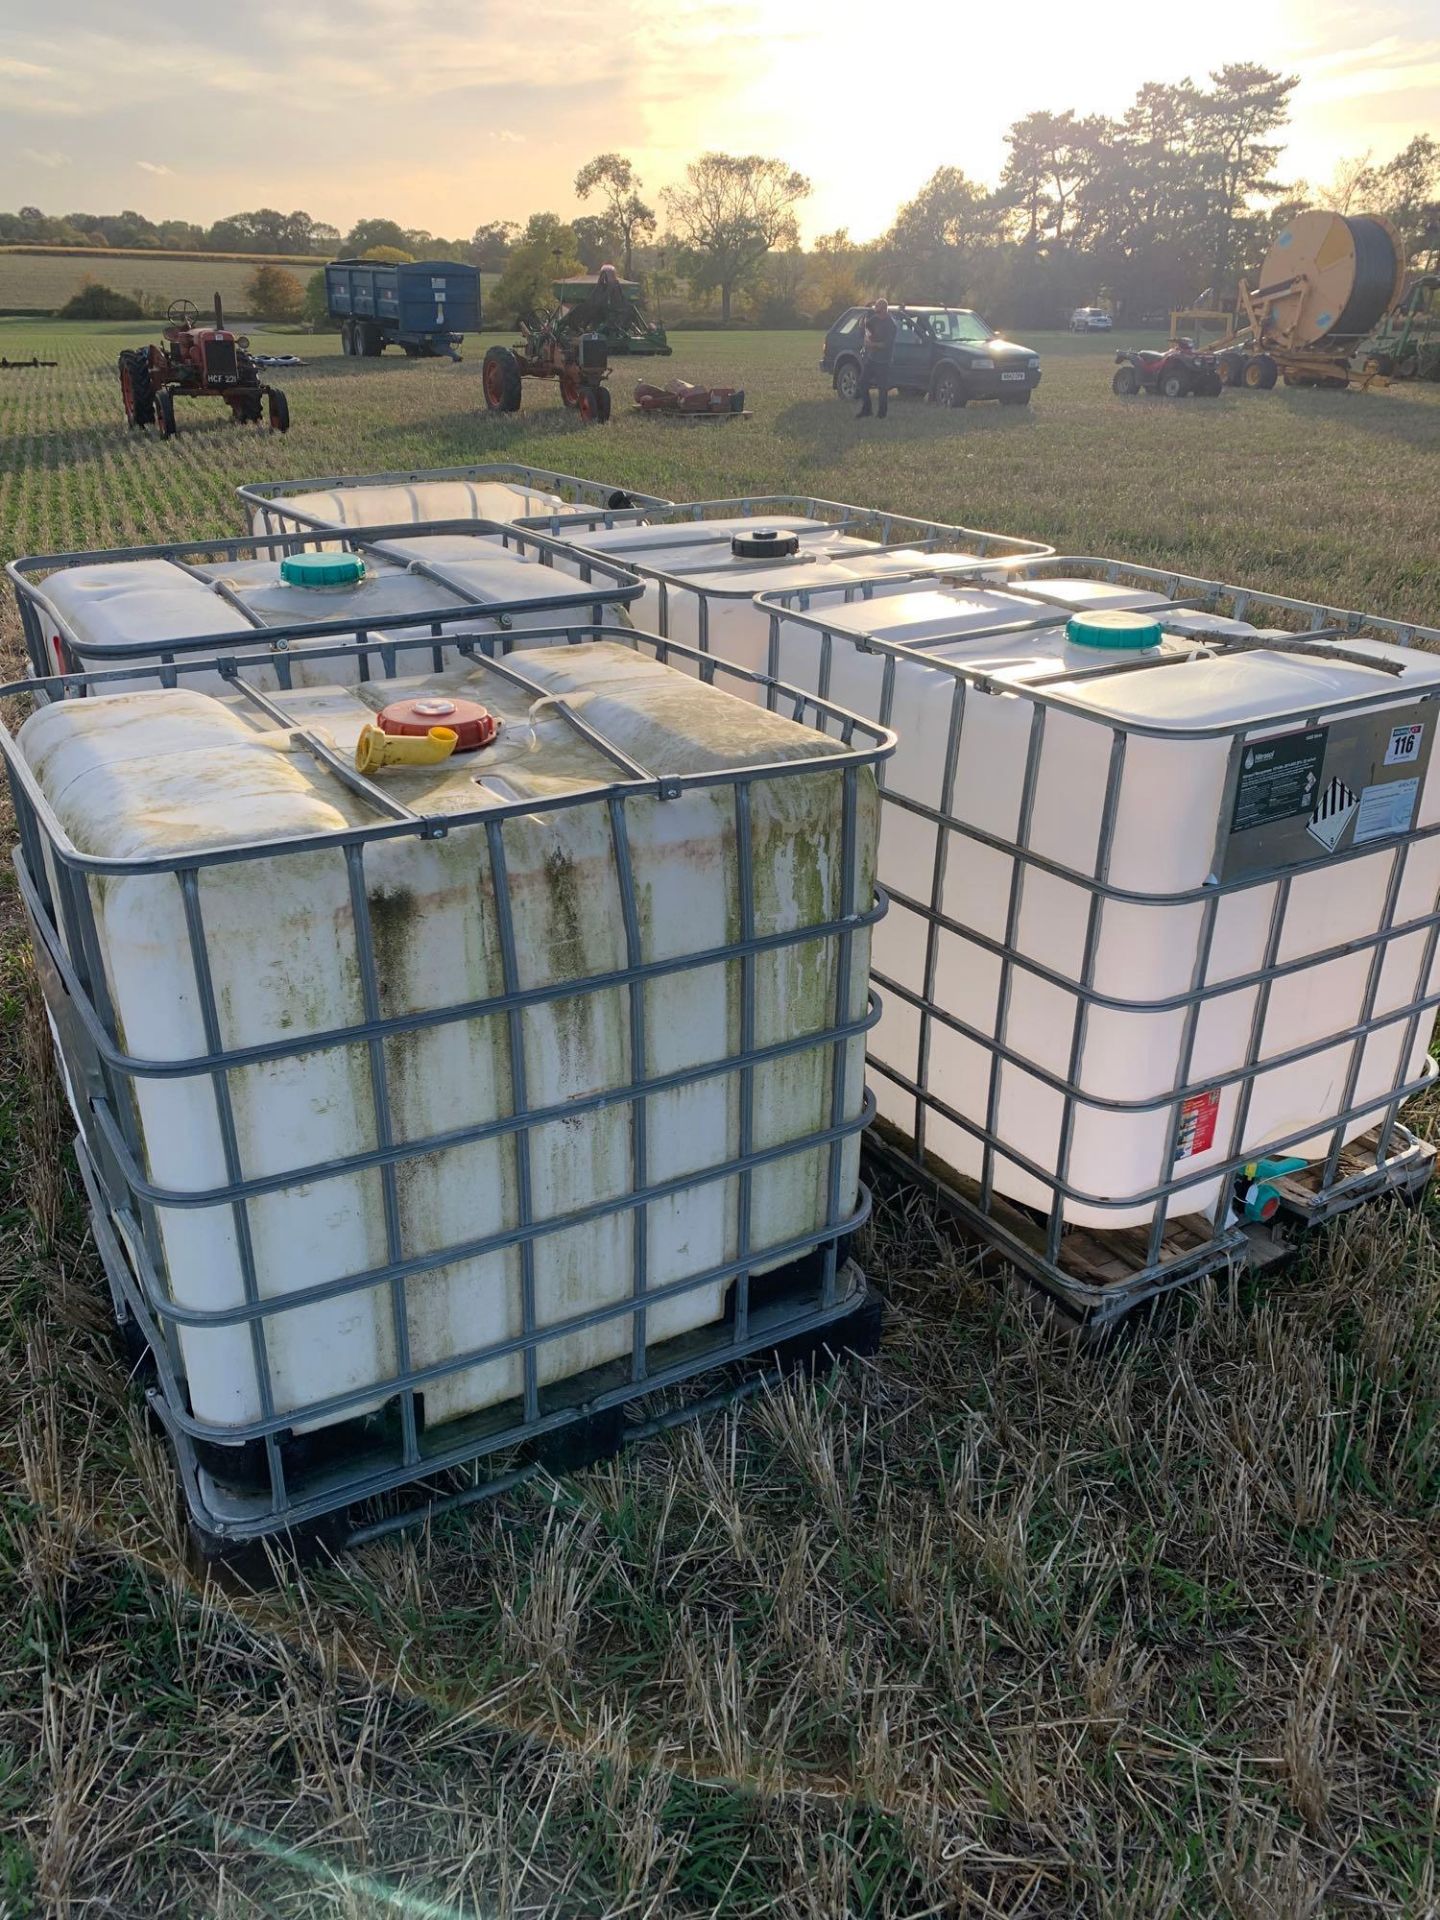 5 No. IBC Containers